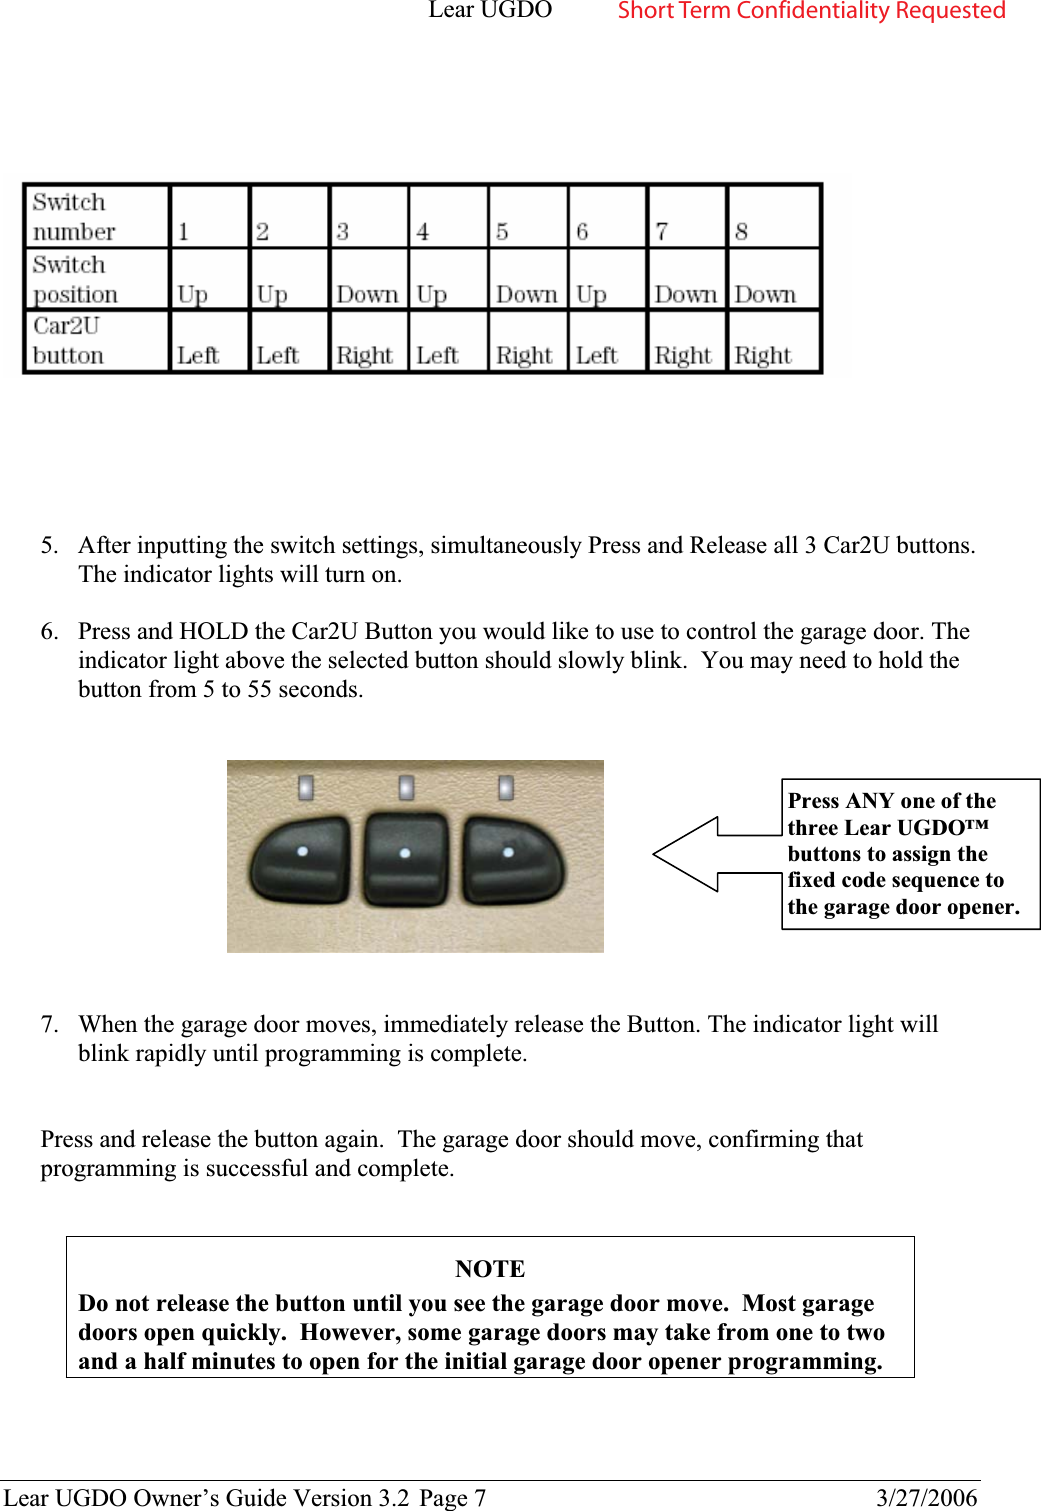 Lear UGDO Lear UGDO Owner’s Guide Version 3.2  Page 7  3/27/2006 5. After inputting the switch settings, simultaneously Press and Release all 3 Car2U buttons. The indicator lights will turn on. 6. Press and HOLD the Car2U Button you would like to use to control the garage door. The indicator light above the selected button should slowly blink.  You may need to hold the button from 5 to 55 seconds.  7. When the garage door moves, immediately release the Button. The indicator light will blink rapidly until programming is complete.  Press and release the button again.  The garage door should move, confirming that programming is successful and complete.   NOTEDo not release the button until you see the garage door move.  Most garage doors open quickly.  However, some garage doors may take from one to two and a half minutes to open for the initial garage door opener programming. Press ANY one of the three Lear UGDO™ buttons to assign the fixed code sequence to the garage door opener. Short Term Confidentiality Requested